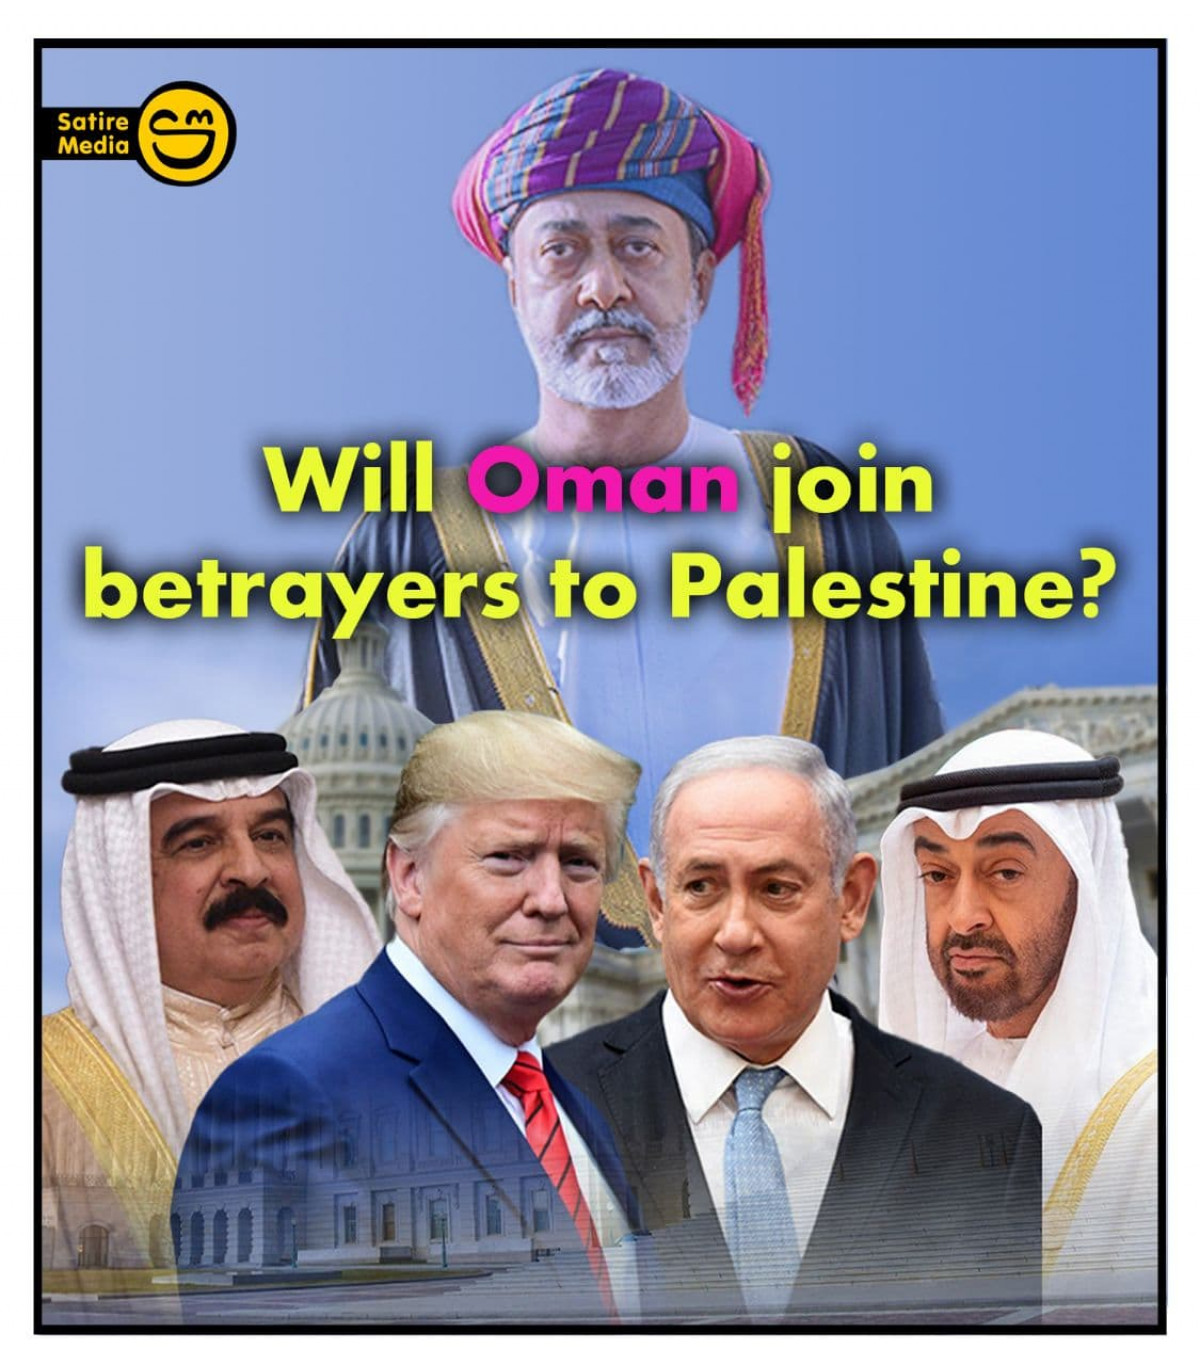 Will Oman join betrayers to Palestine